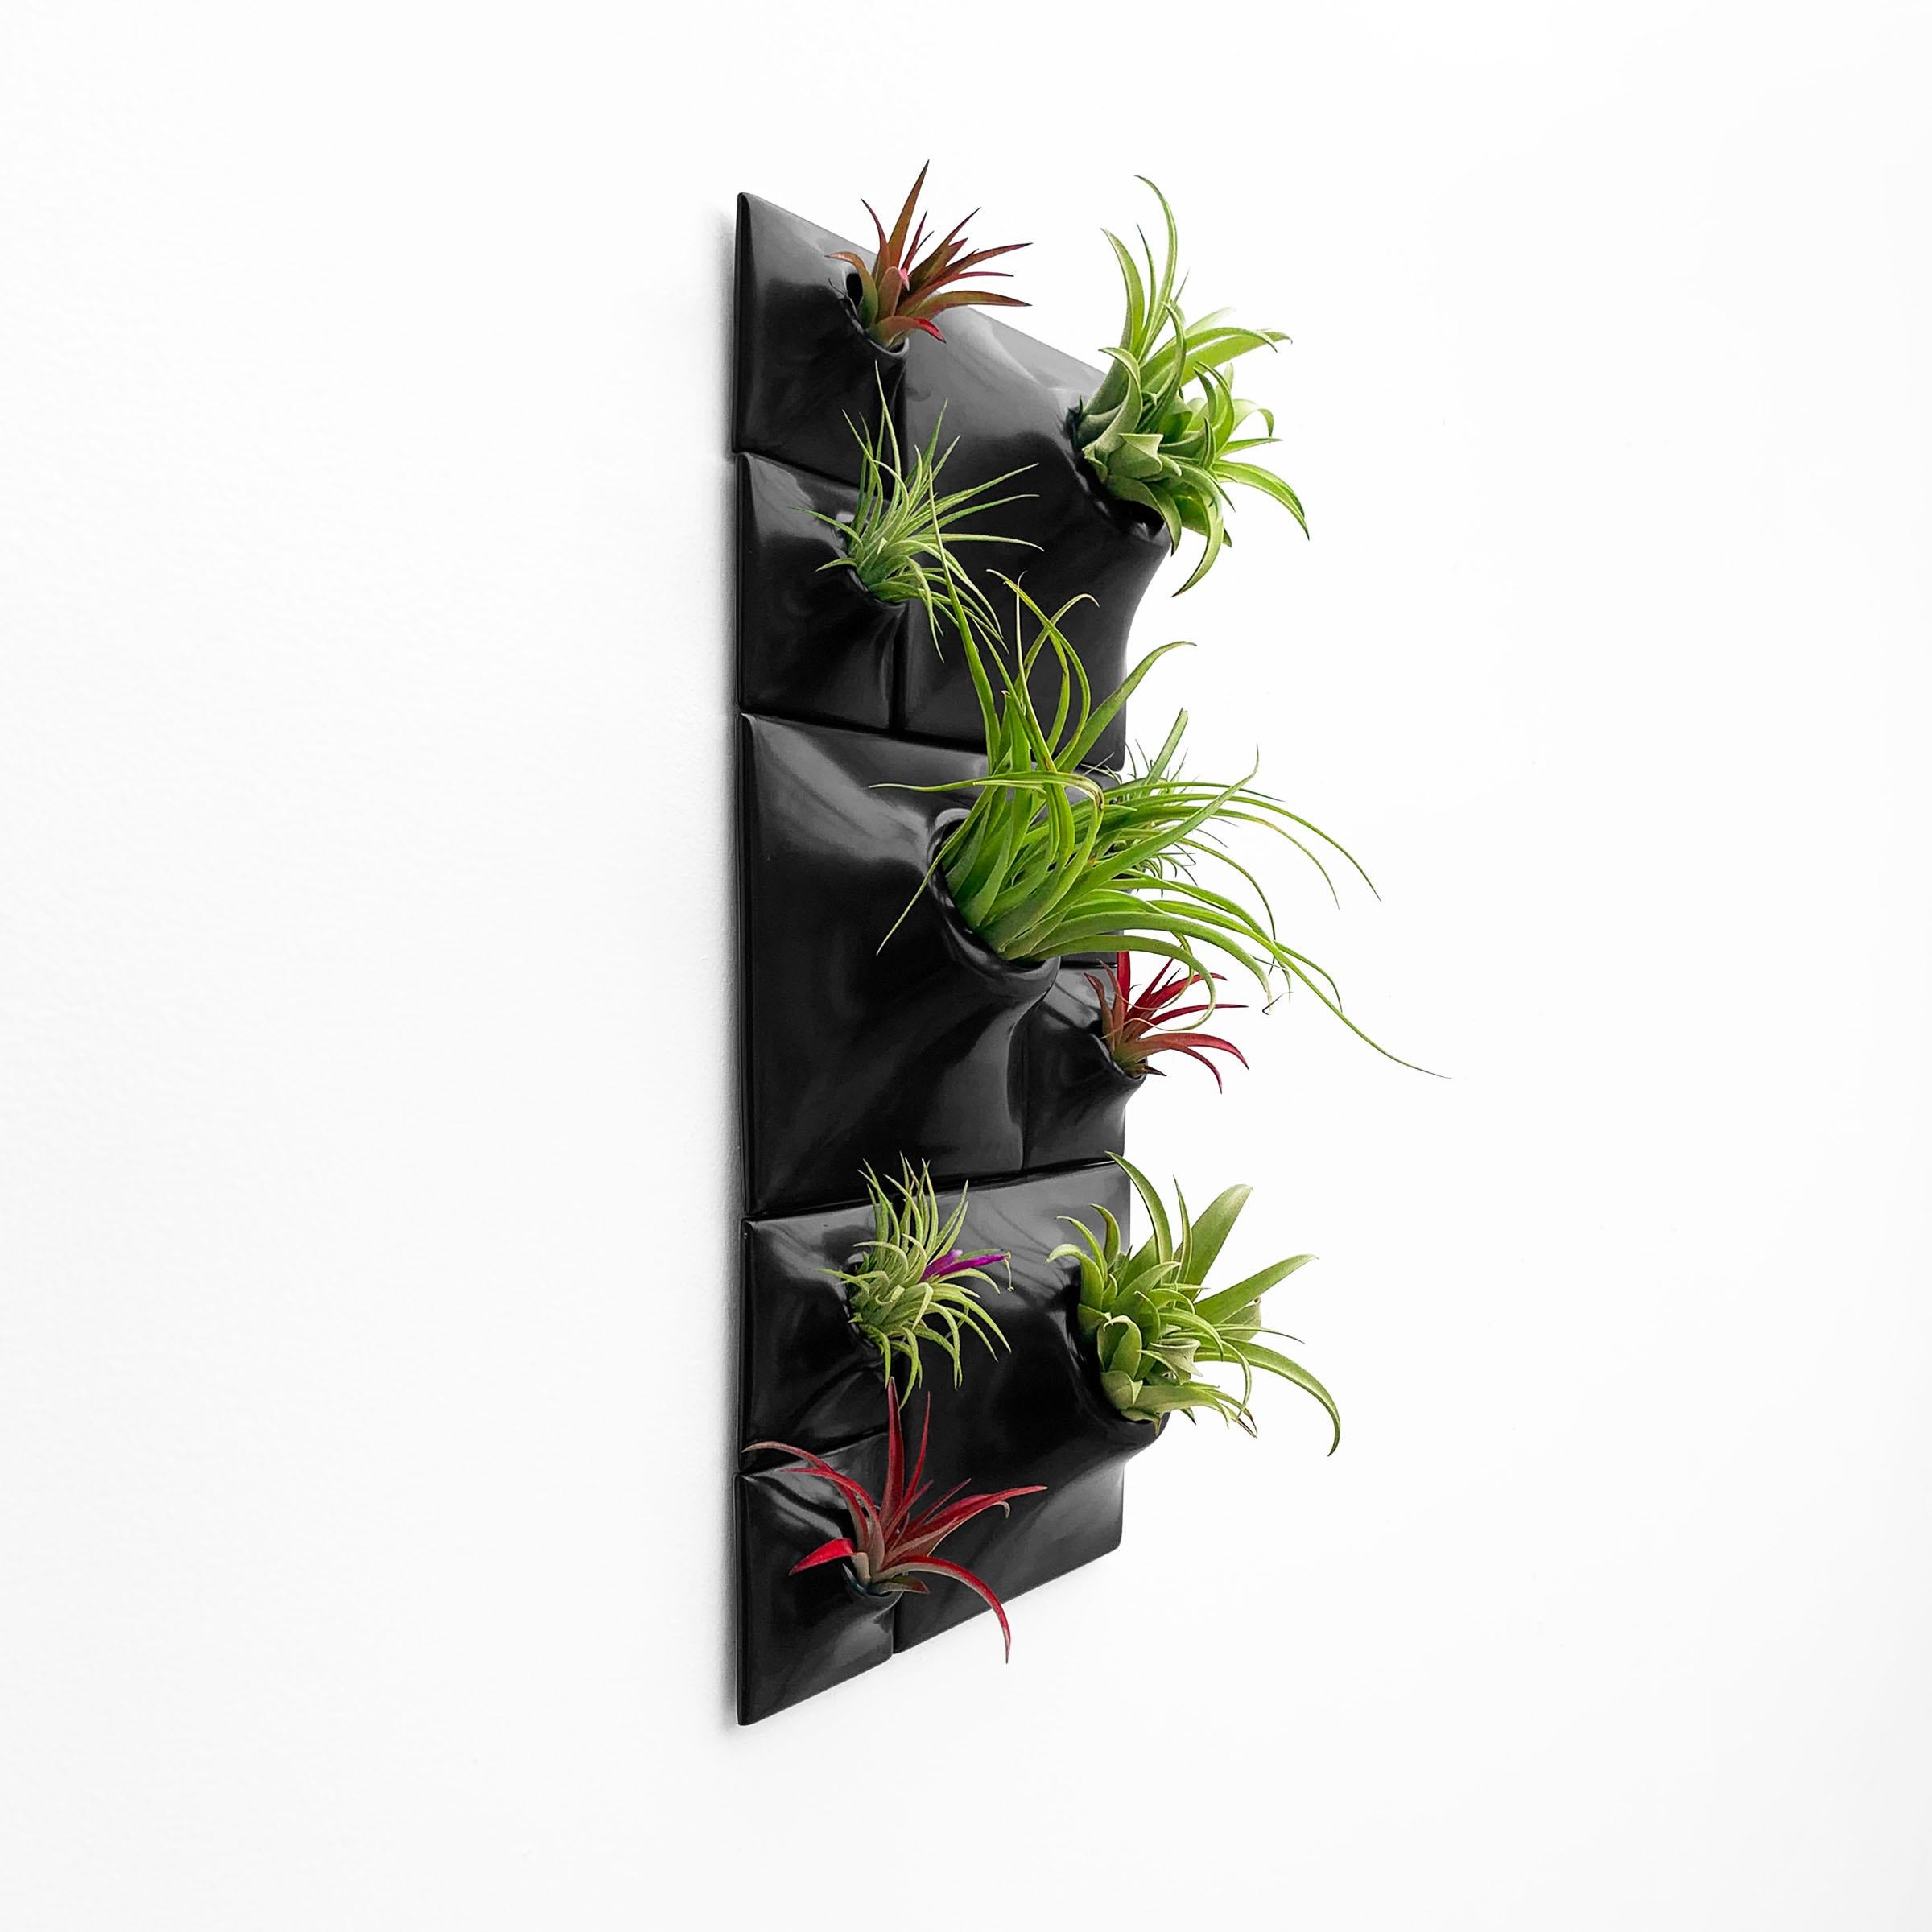 Modern Black Wall Planter Set, Biophilic Wall Sculpture, Moss Wall Art, Node BR3

Take your plant wall design to the next level and create an elegant biophilic centerpiece with this awe-inspiring set of modular Node Wall Planters. Create a moss wall